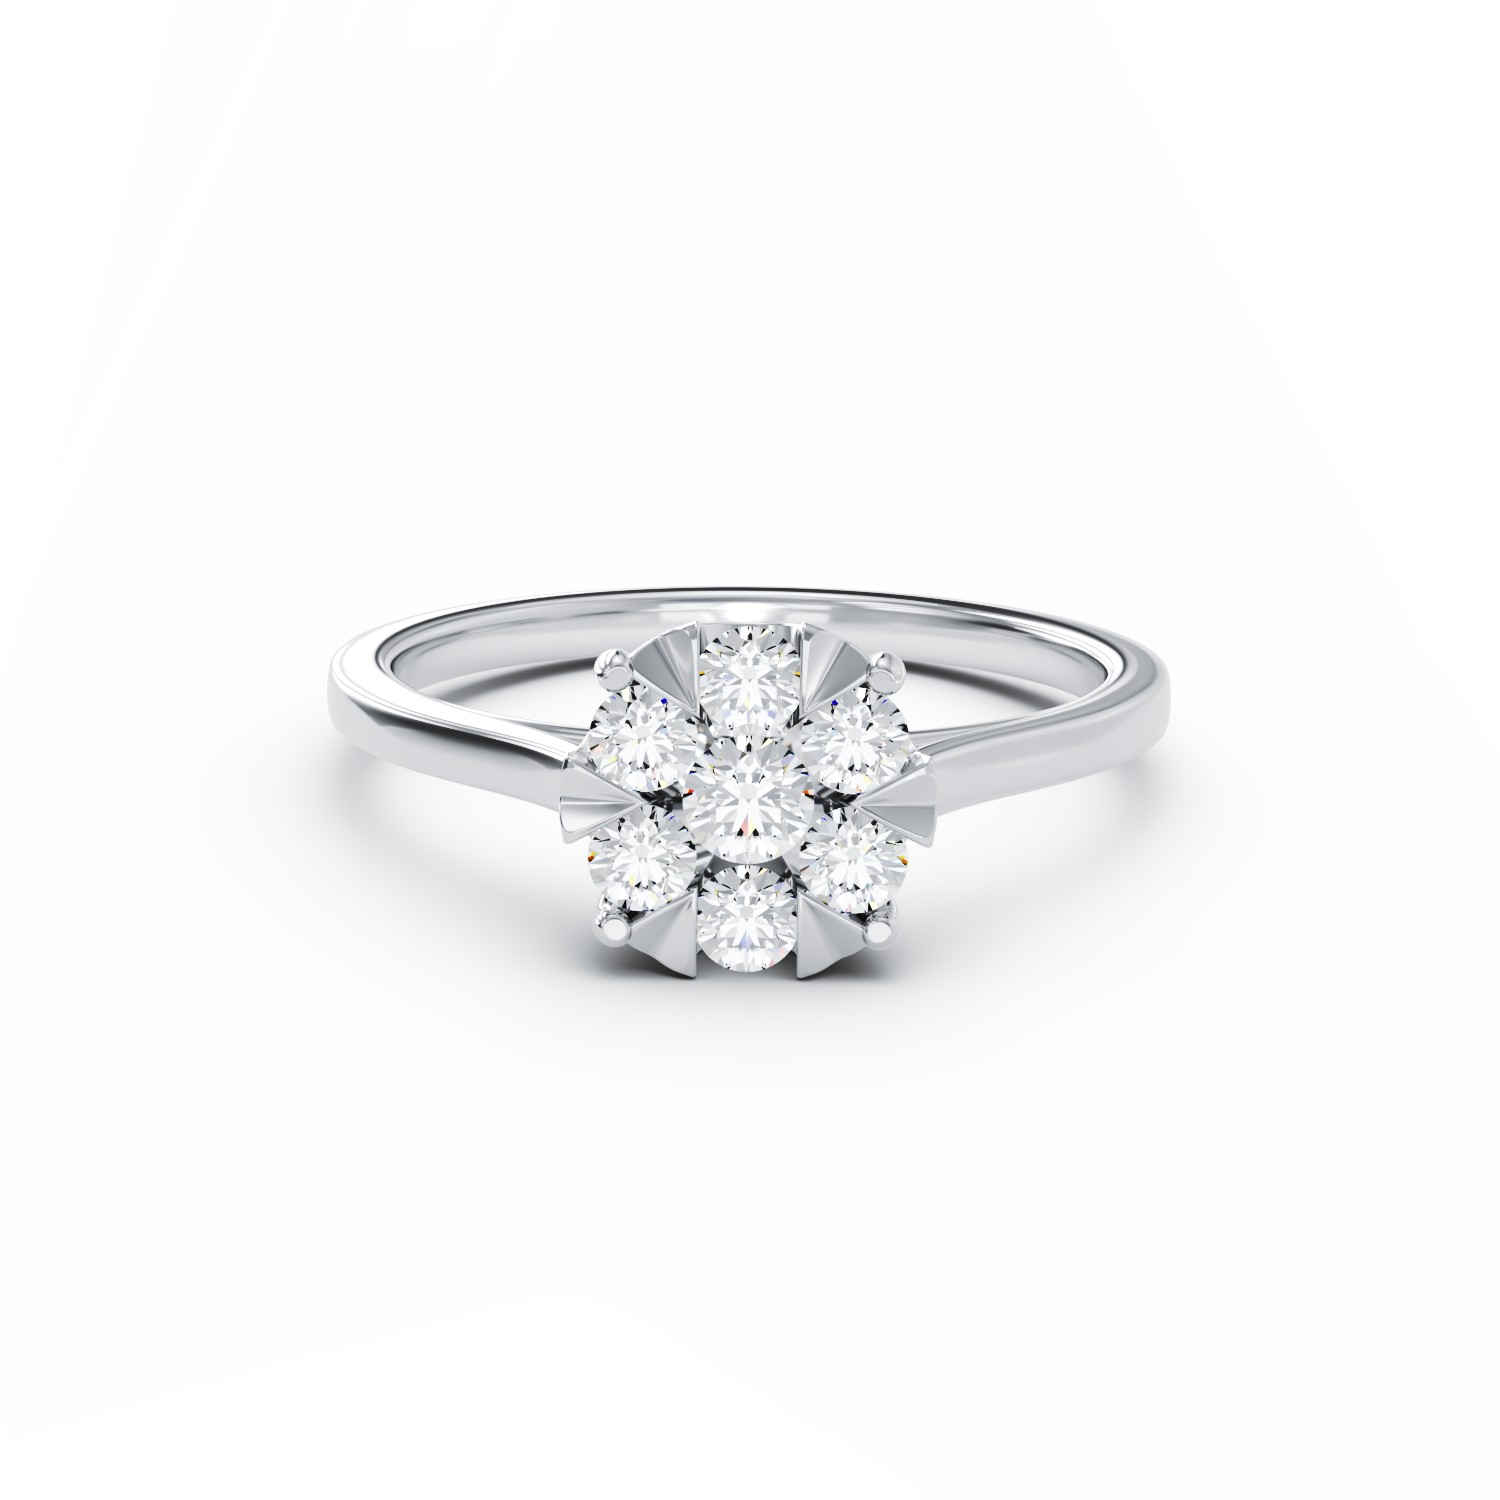 18K white gold engagement ring with 0.25ct diamonds